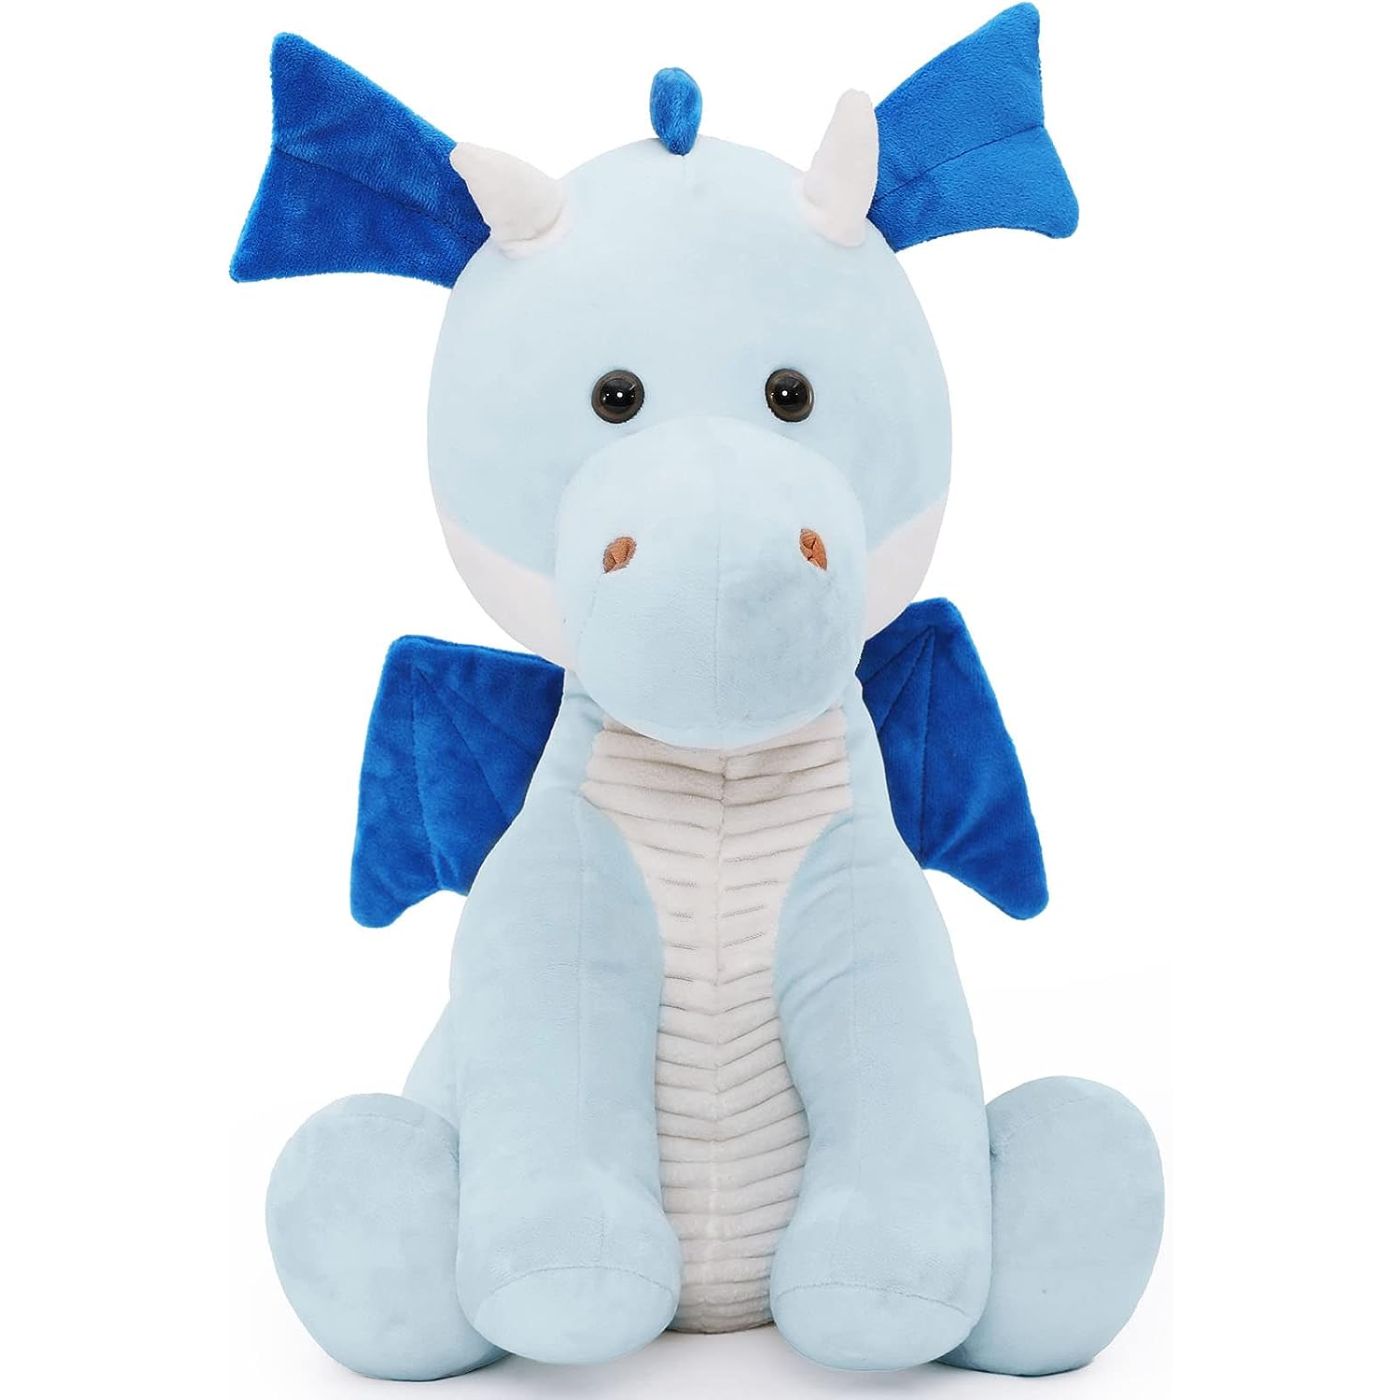 Flying Dragon Plush Toy, Blue, 17 Inches